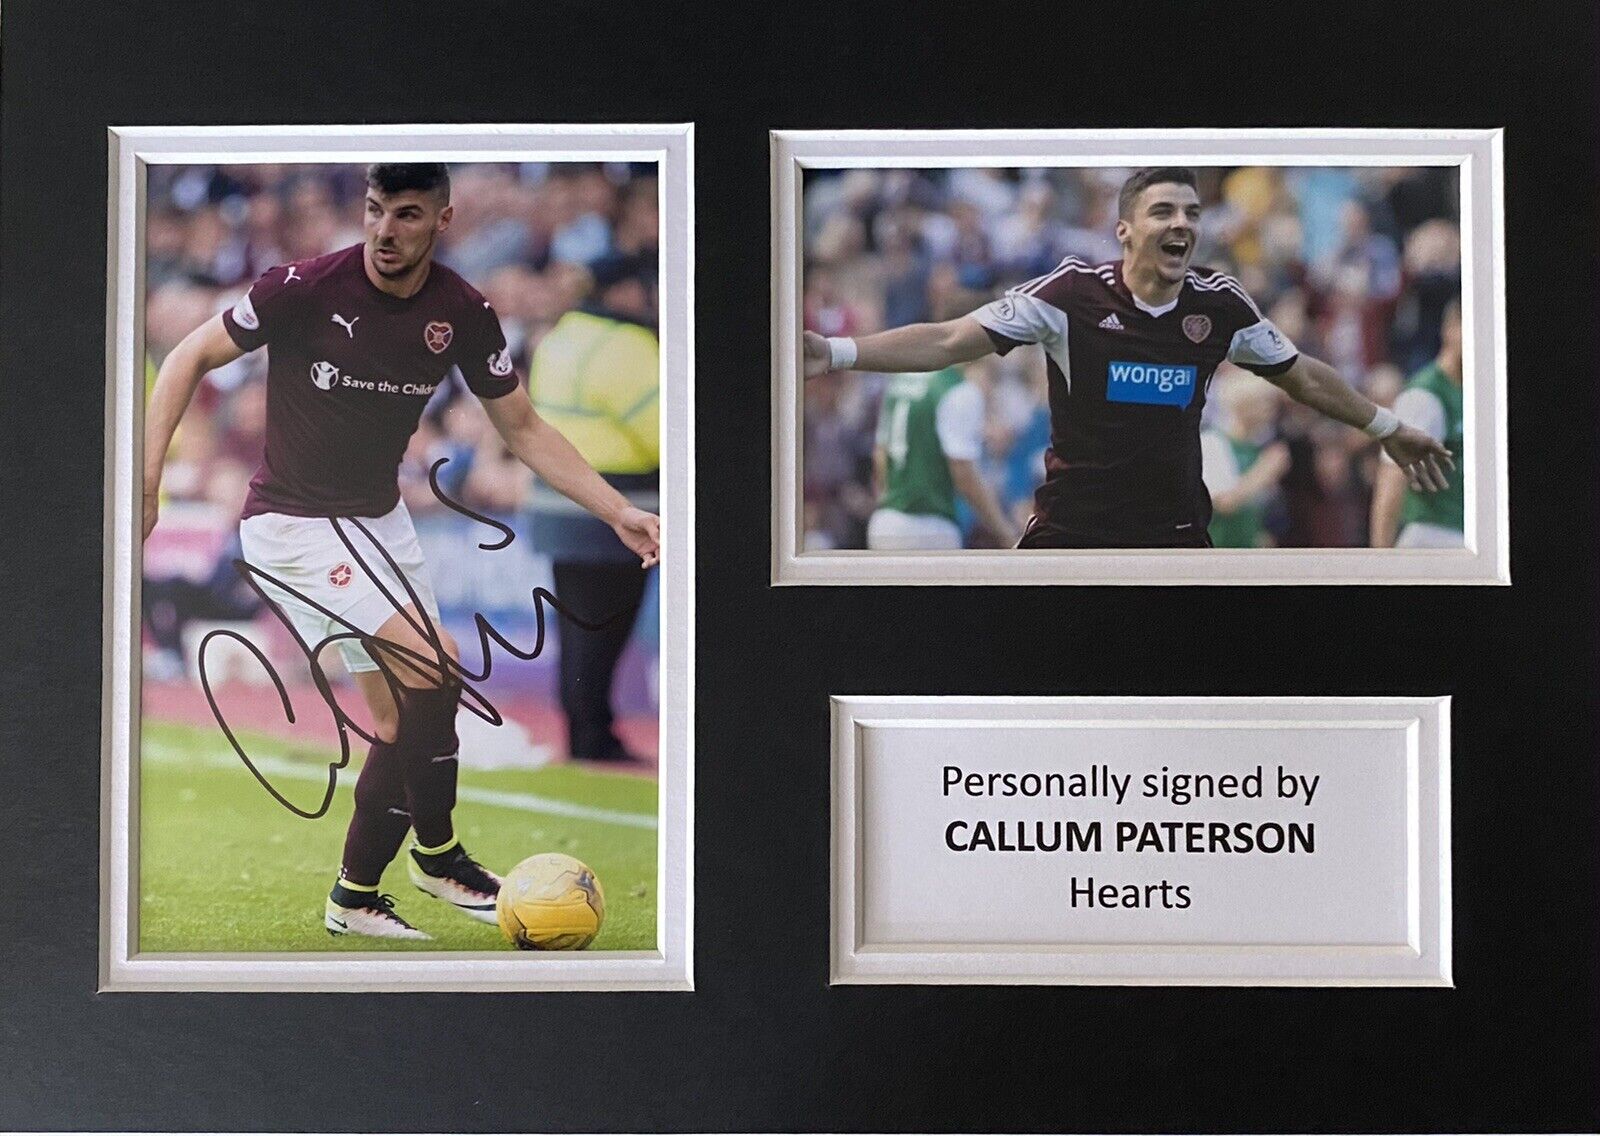 Callum Paterson Hand Signed Photo Poster painting In A4 Hearts Mount Display